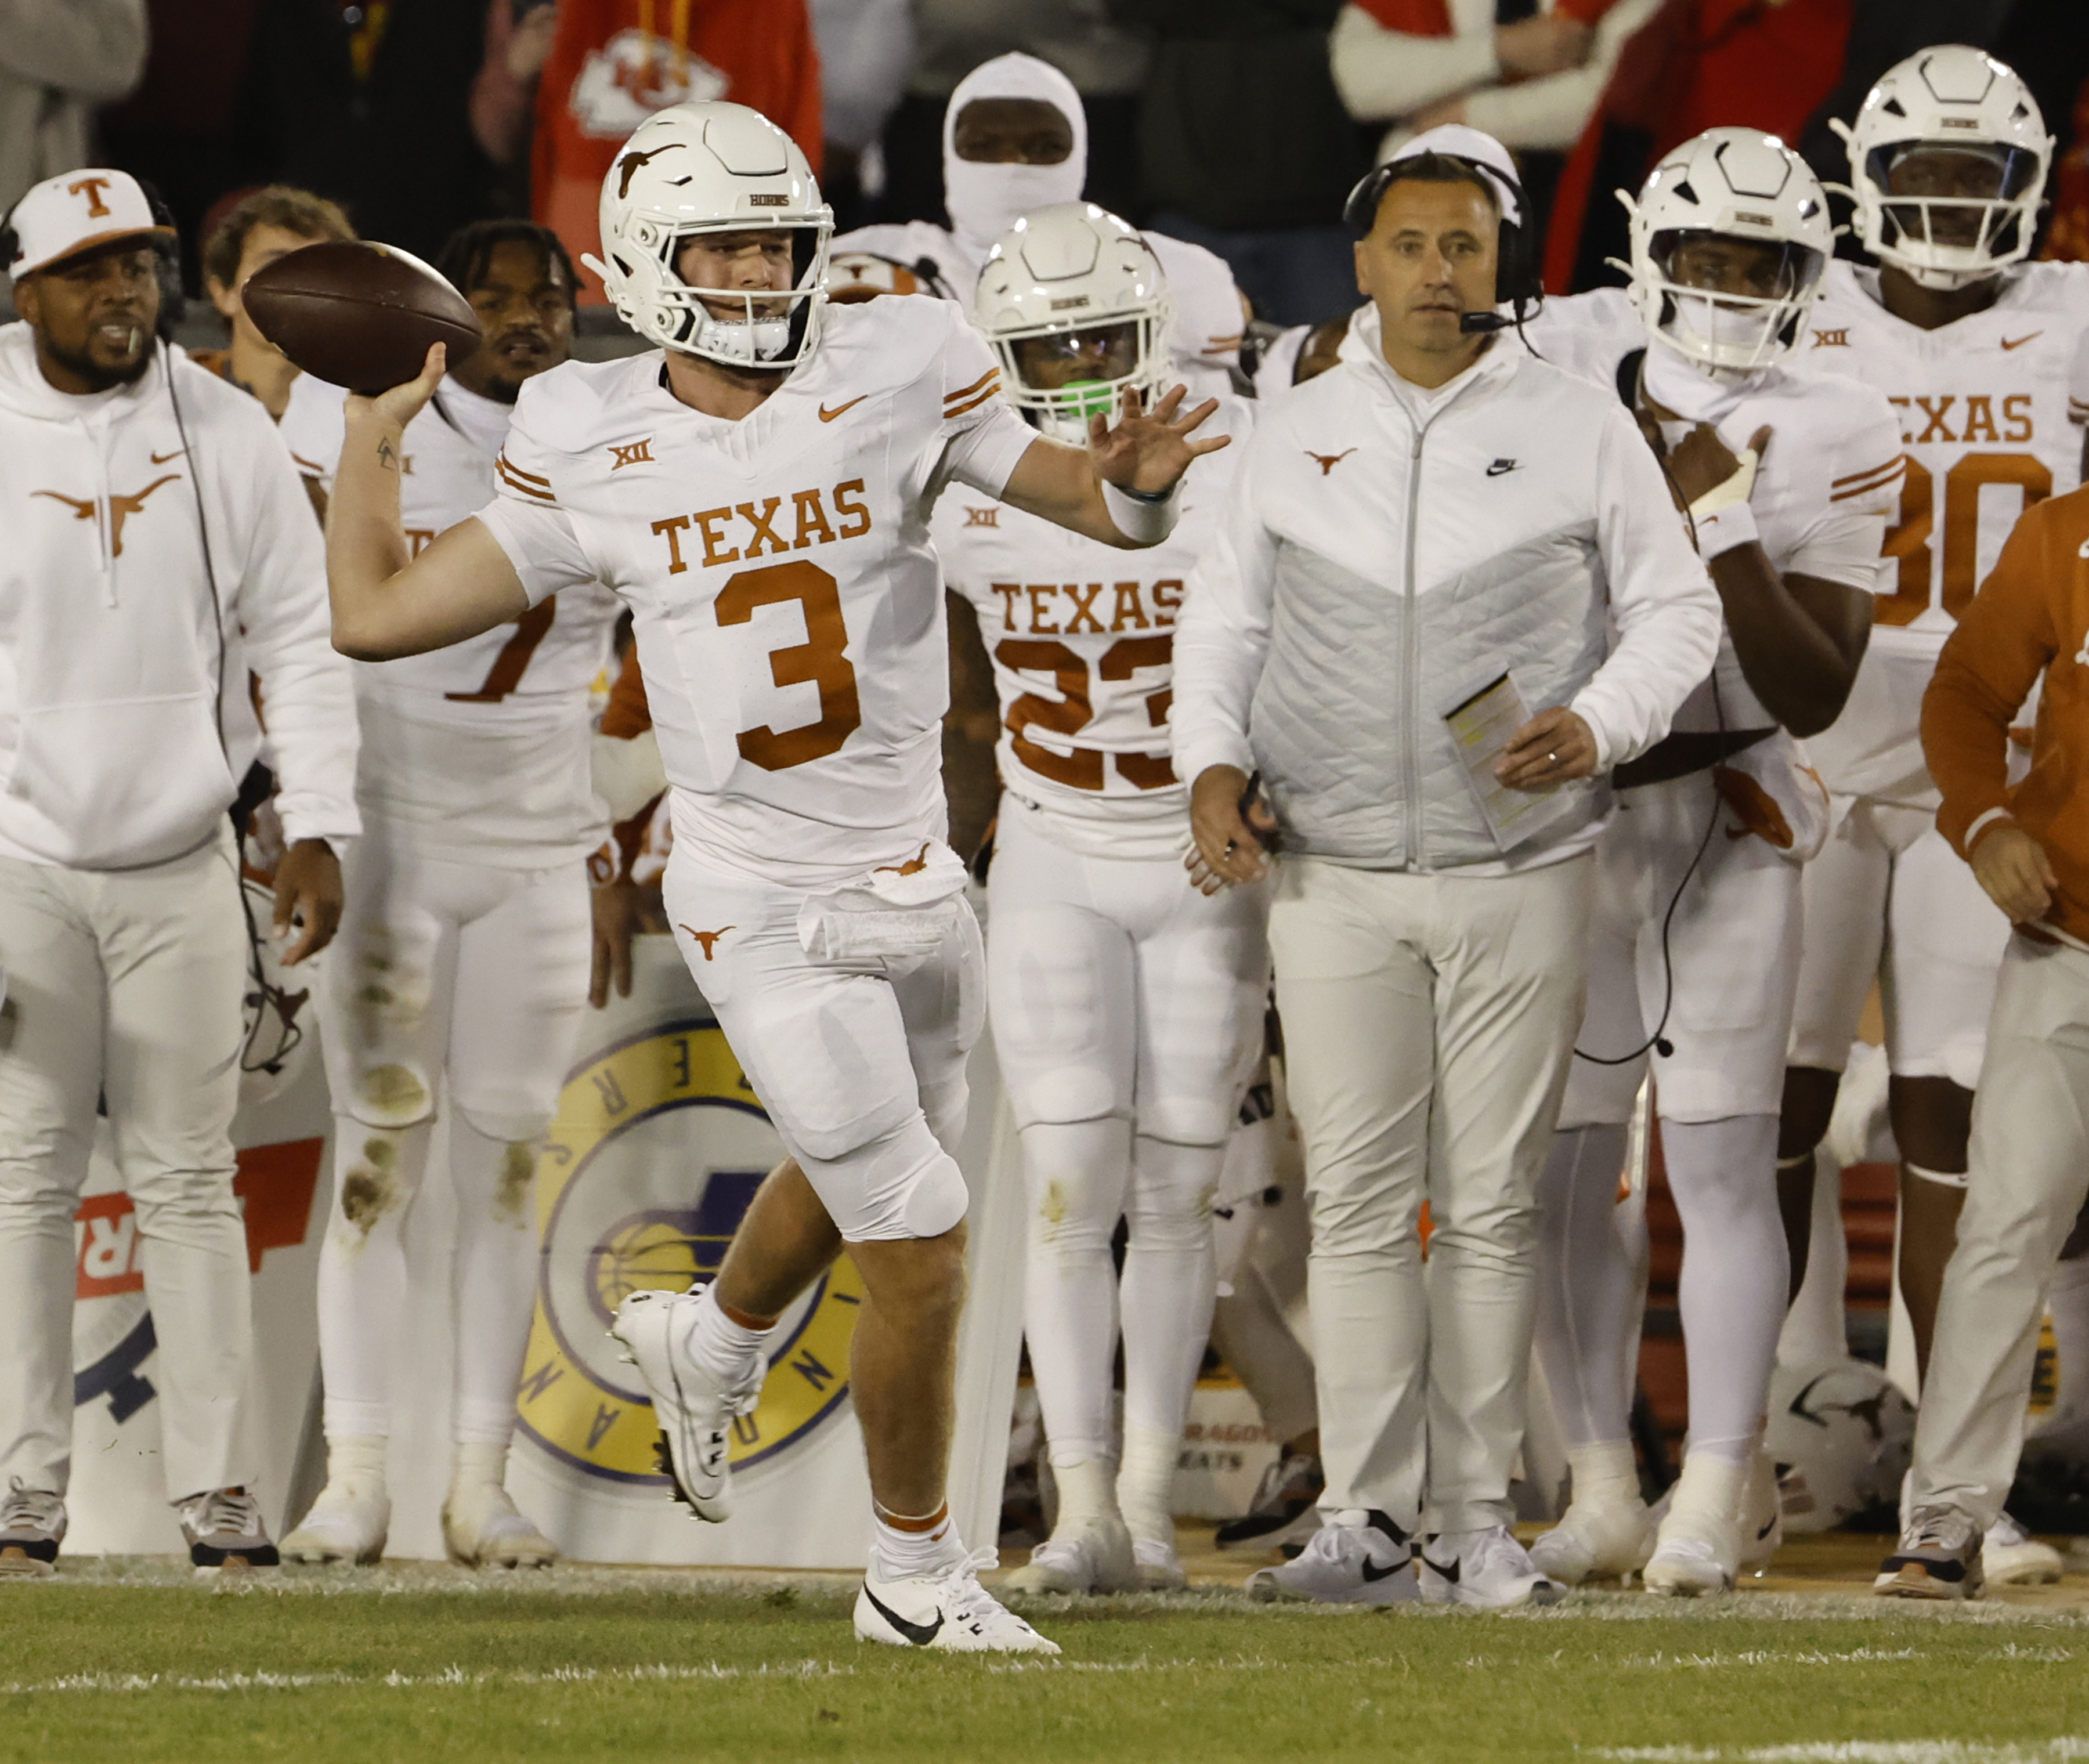 Bevo's Daily Roundup: Las Vegas odds say Texas will be middle of the pack  in 2021 - Burnt Orange Nation